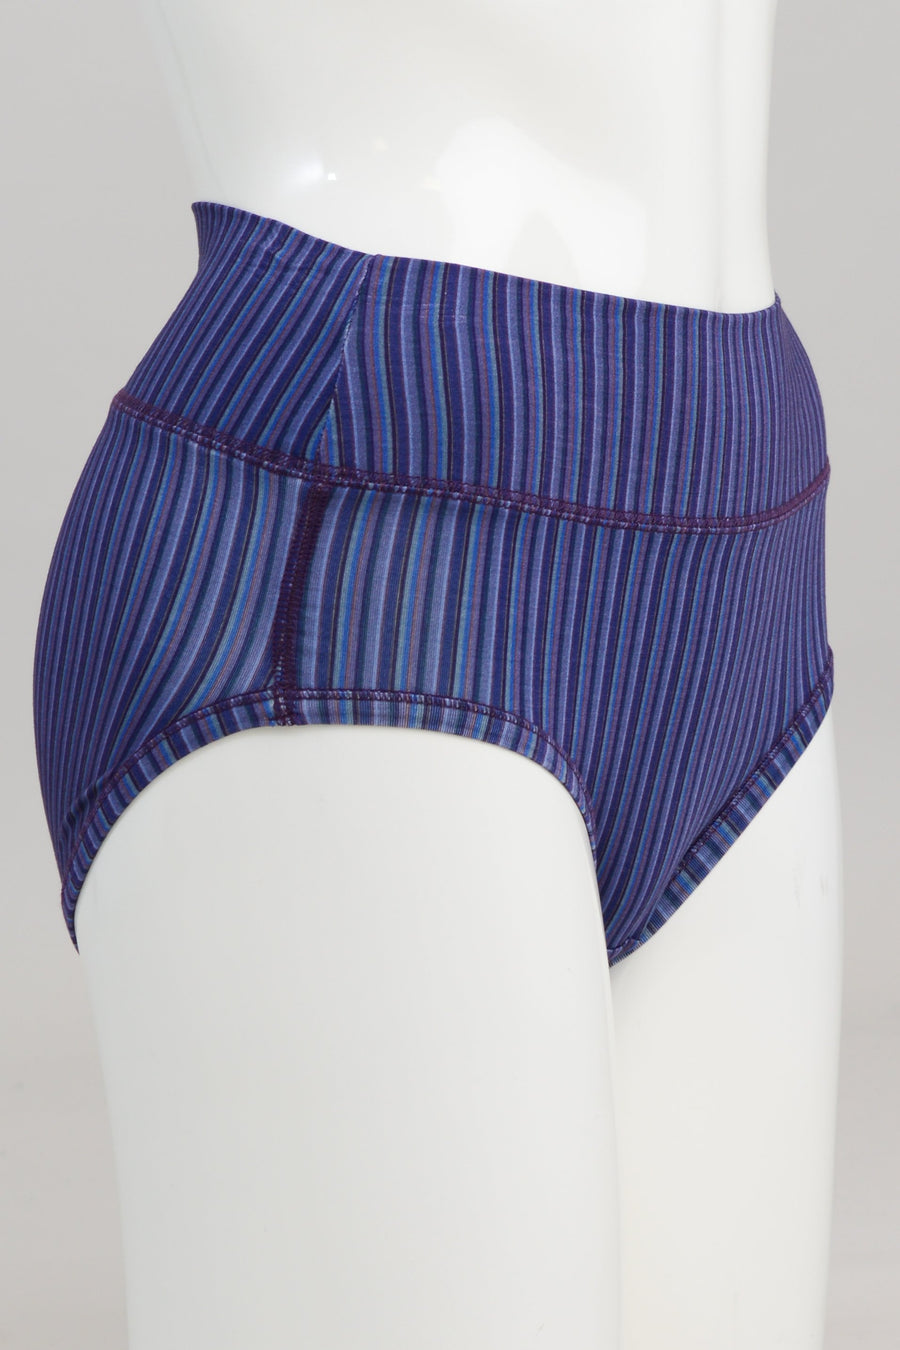 Blue Sky - La Gaunche Violet Stripes  Women's Bamboo Underwear – All  Things Being Eco